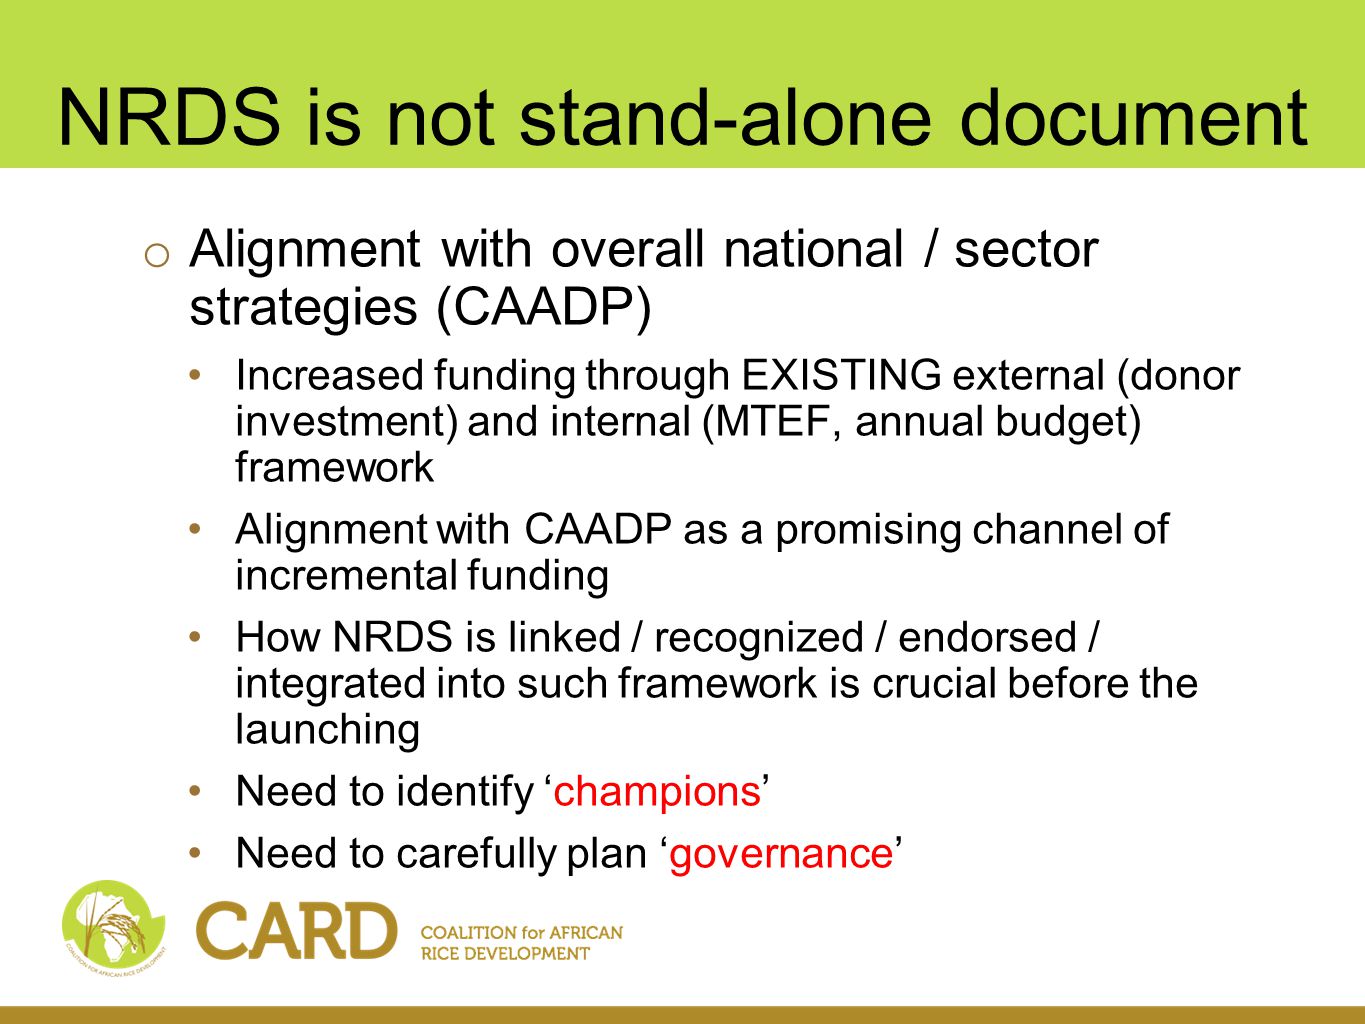 NRDS is not stand-alone document o Alignment with overall national / sector strategies (CAADP) Increased funding through EXISTING external (donor investment) and internal (MTEF, annual budget) framework Alignment with CAADP as a promising channel of incremental funding How NRDS is linked / recognized / endorsed / integrated into such framework is crucial before the launching Need to identify champions Need to carefully plan governance